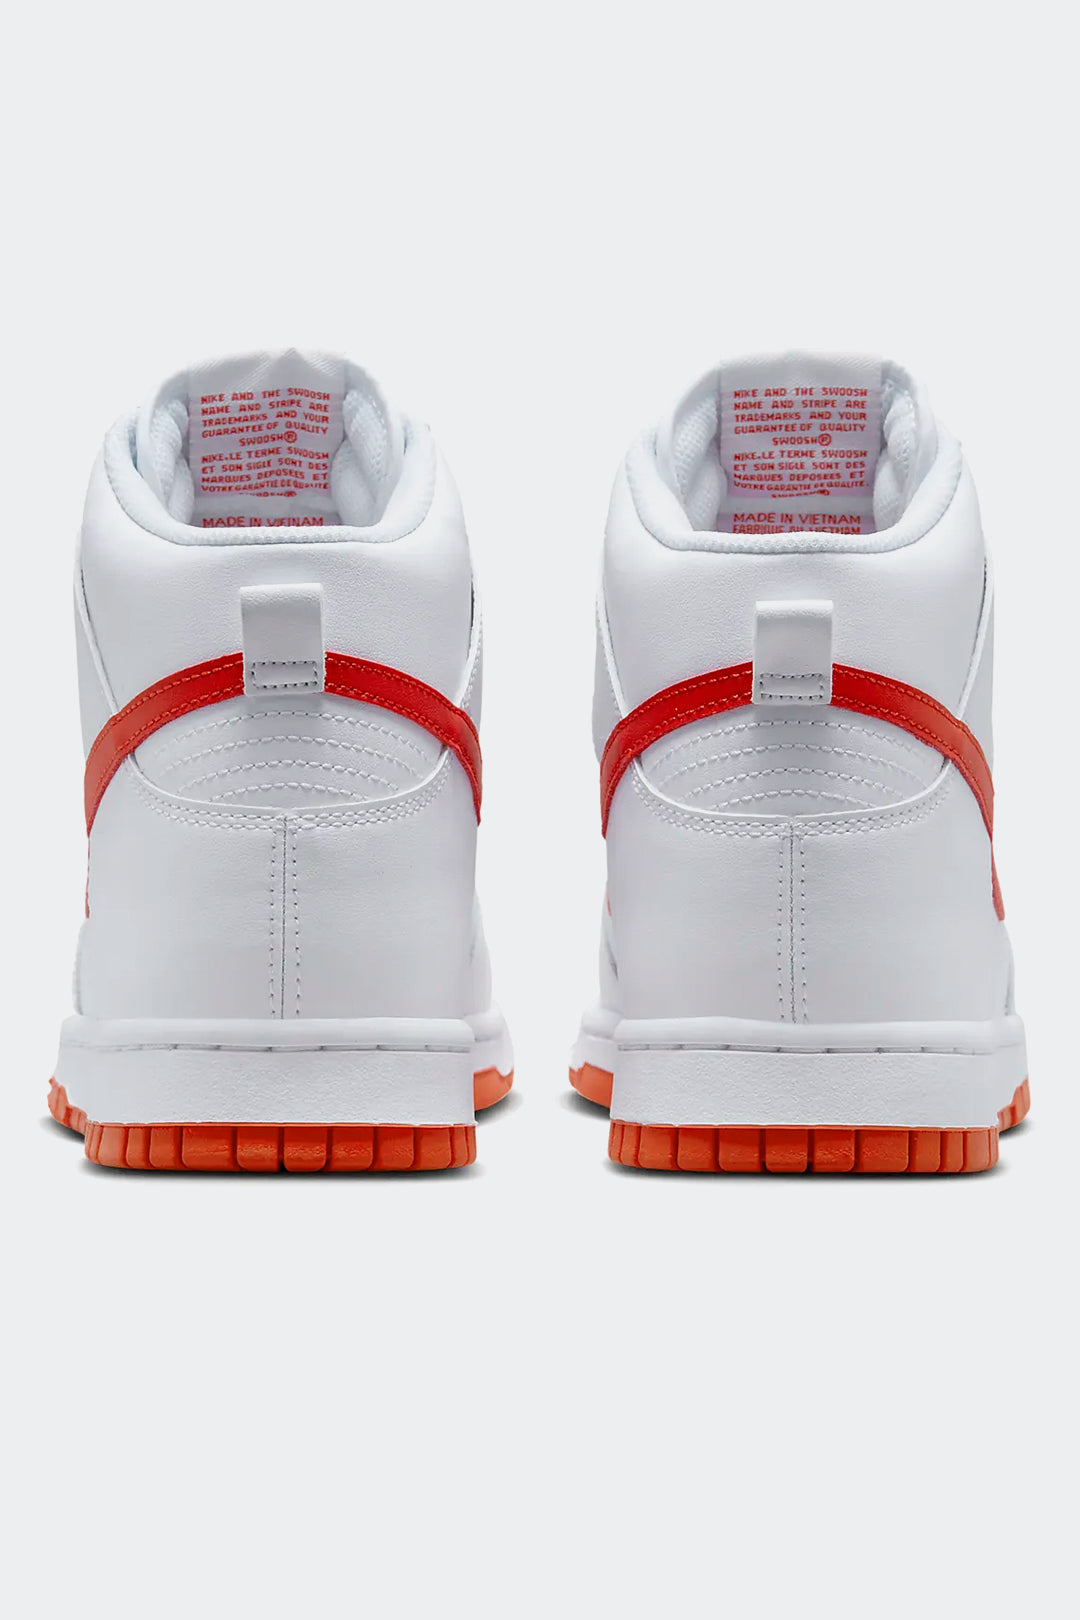 NIKE DUNK HIGH RETRO WHITE "PICANTE RED" - HYPE